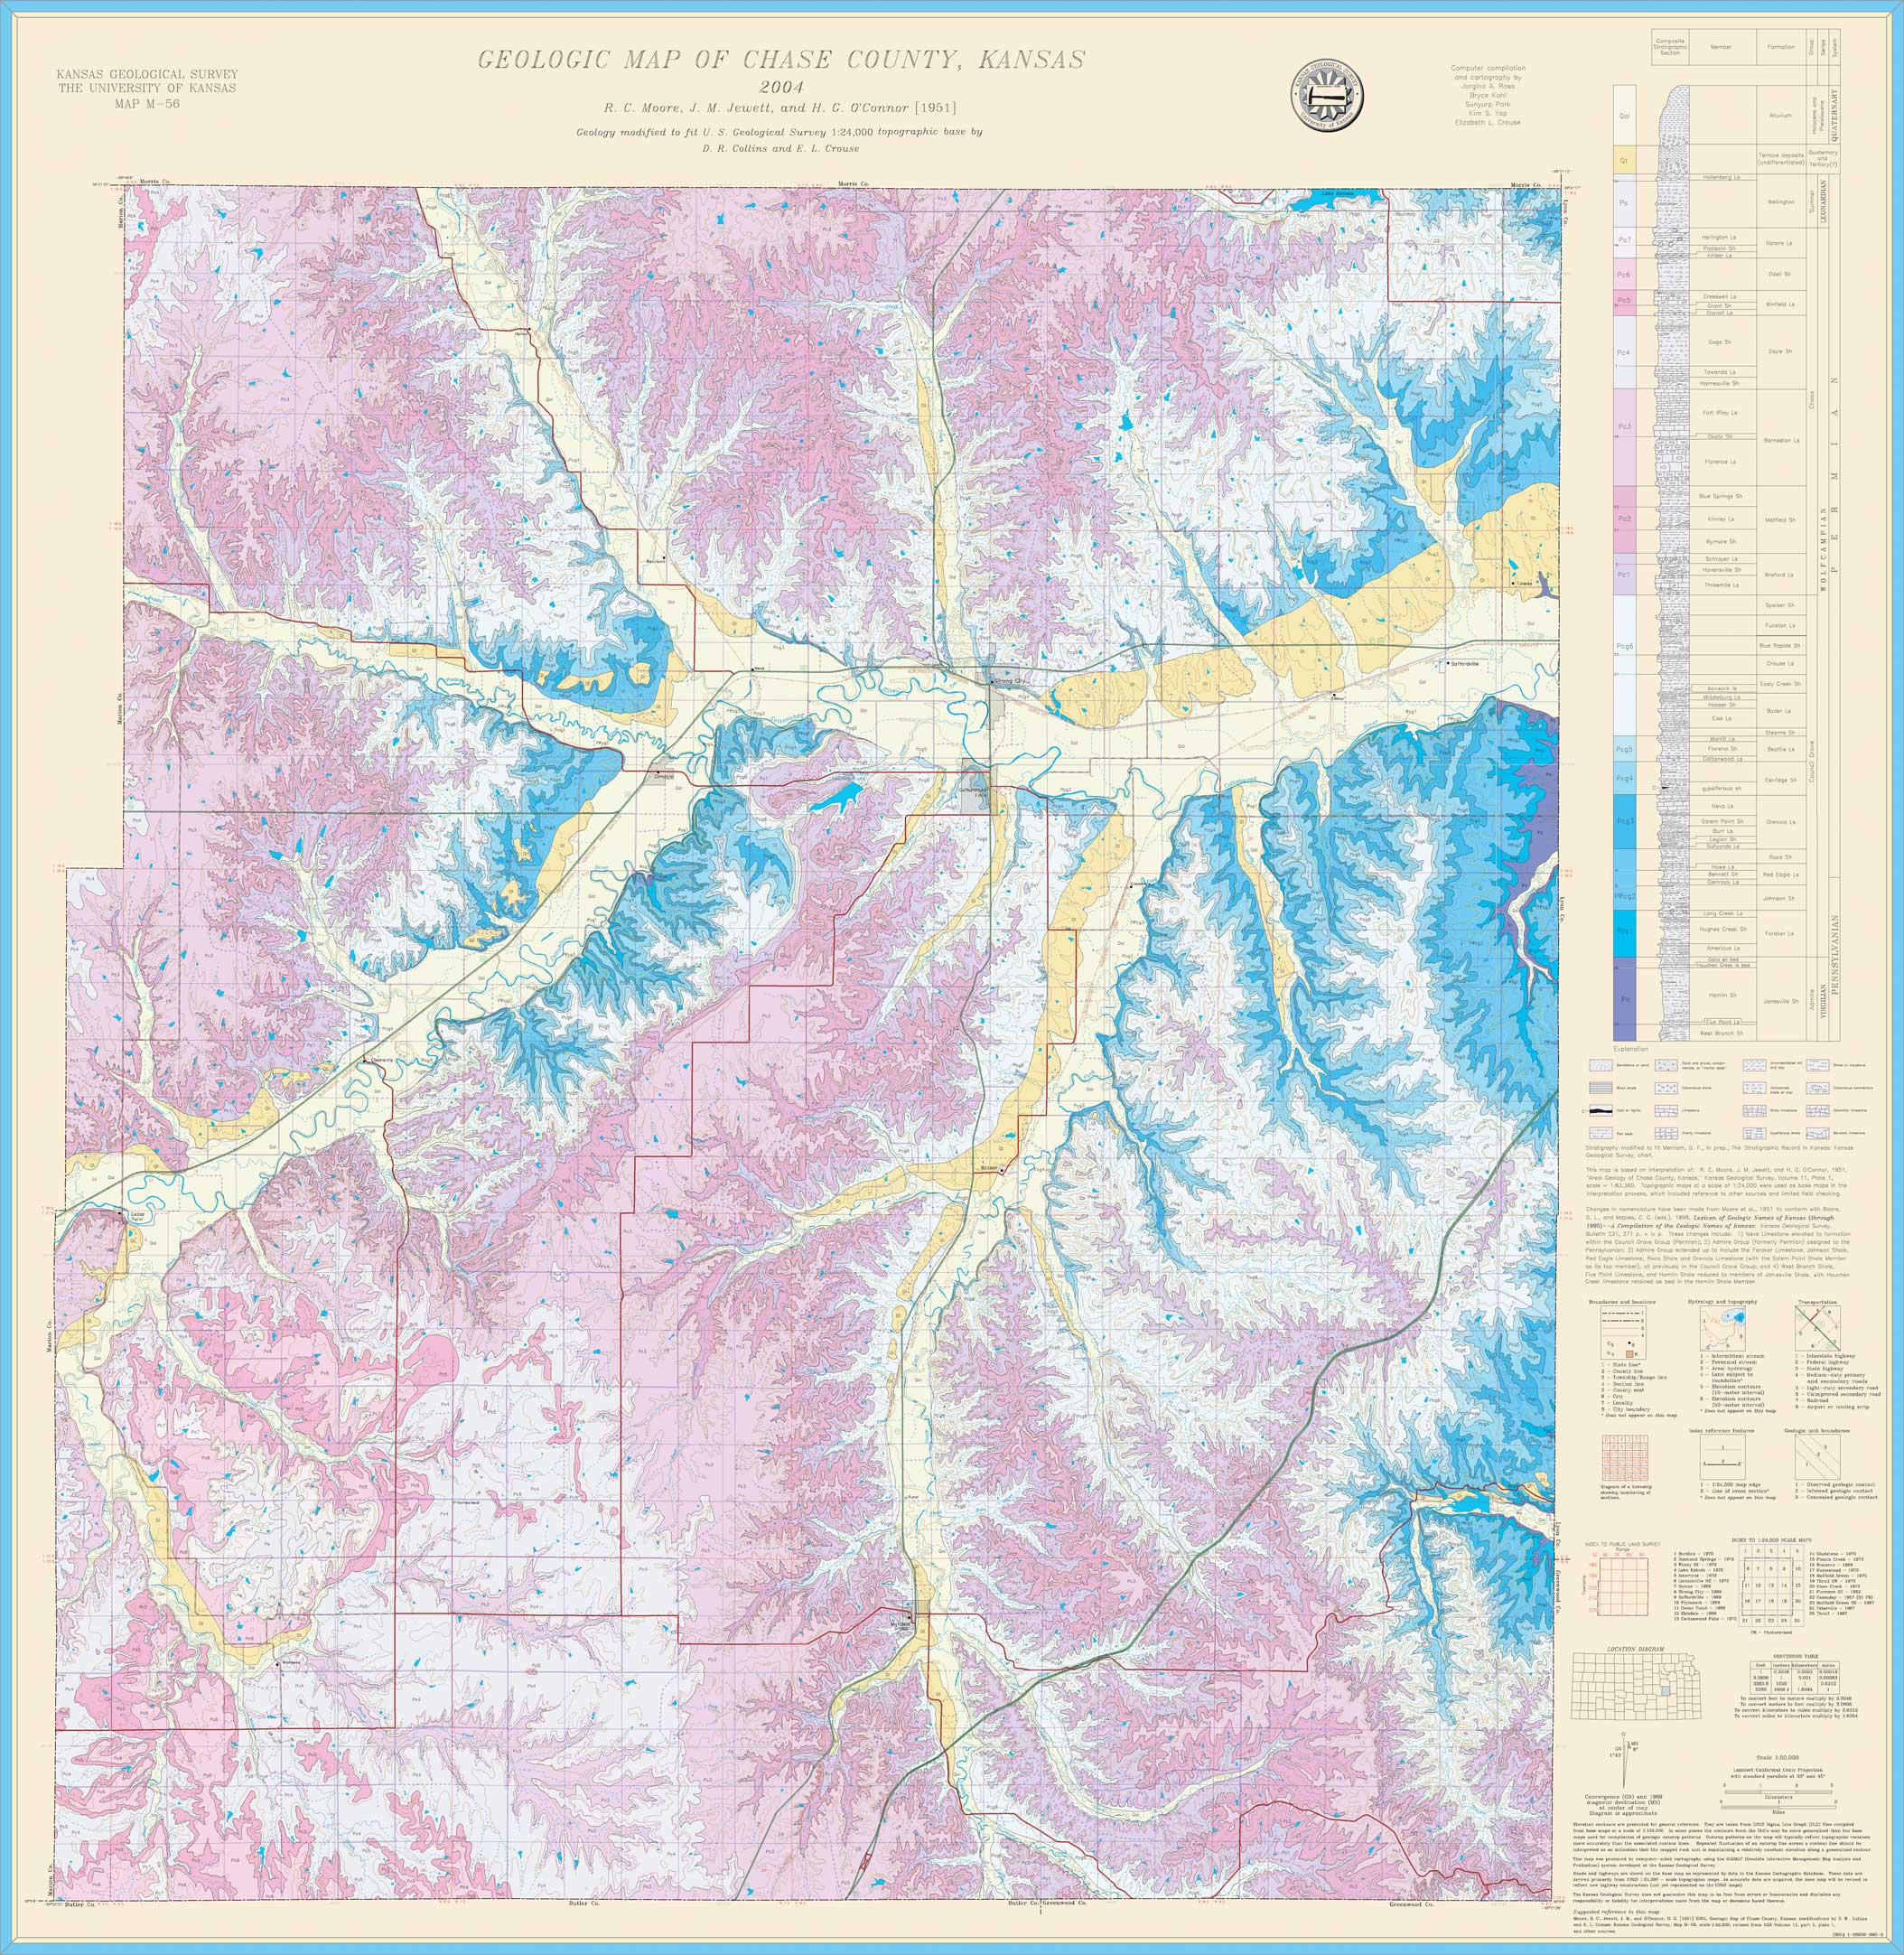 Chase County geologic map